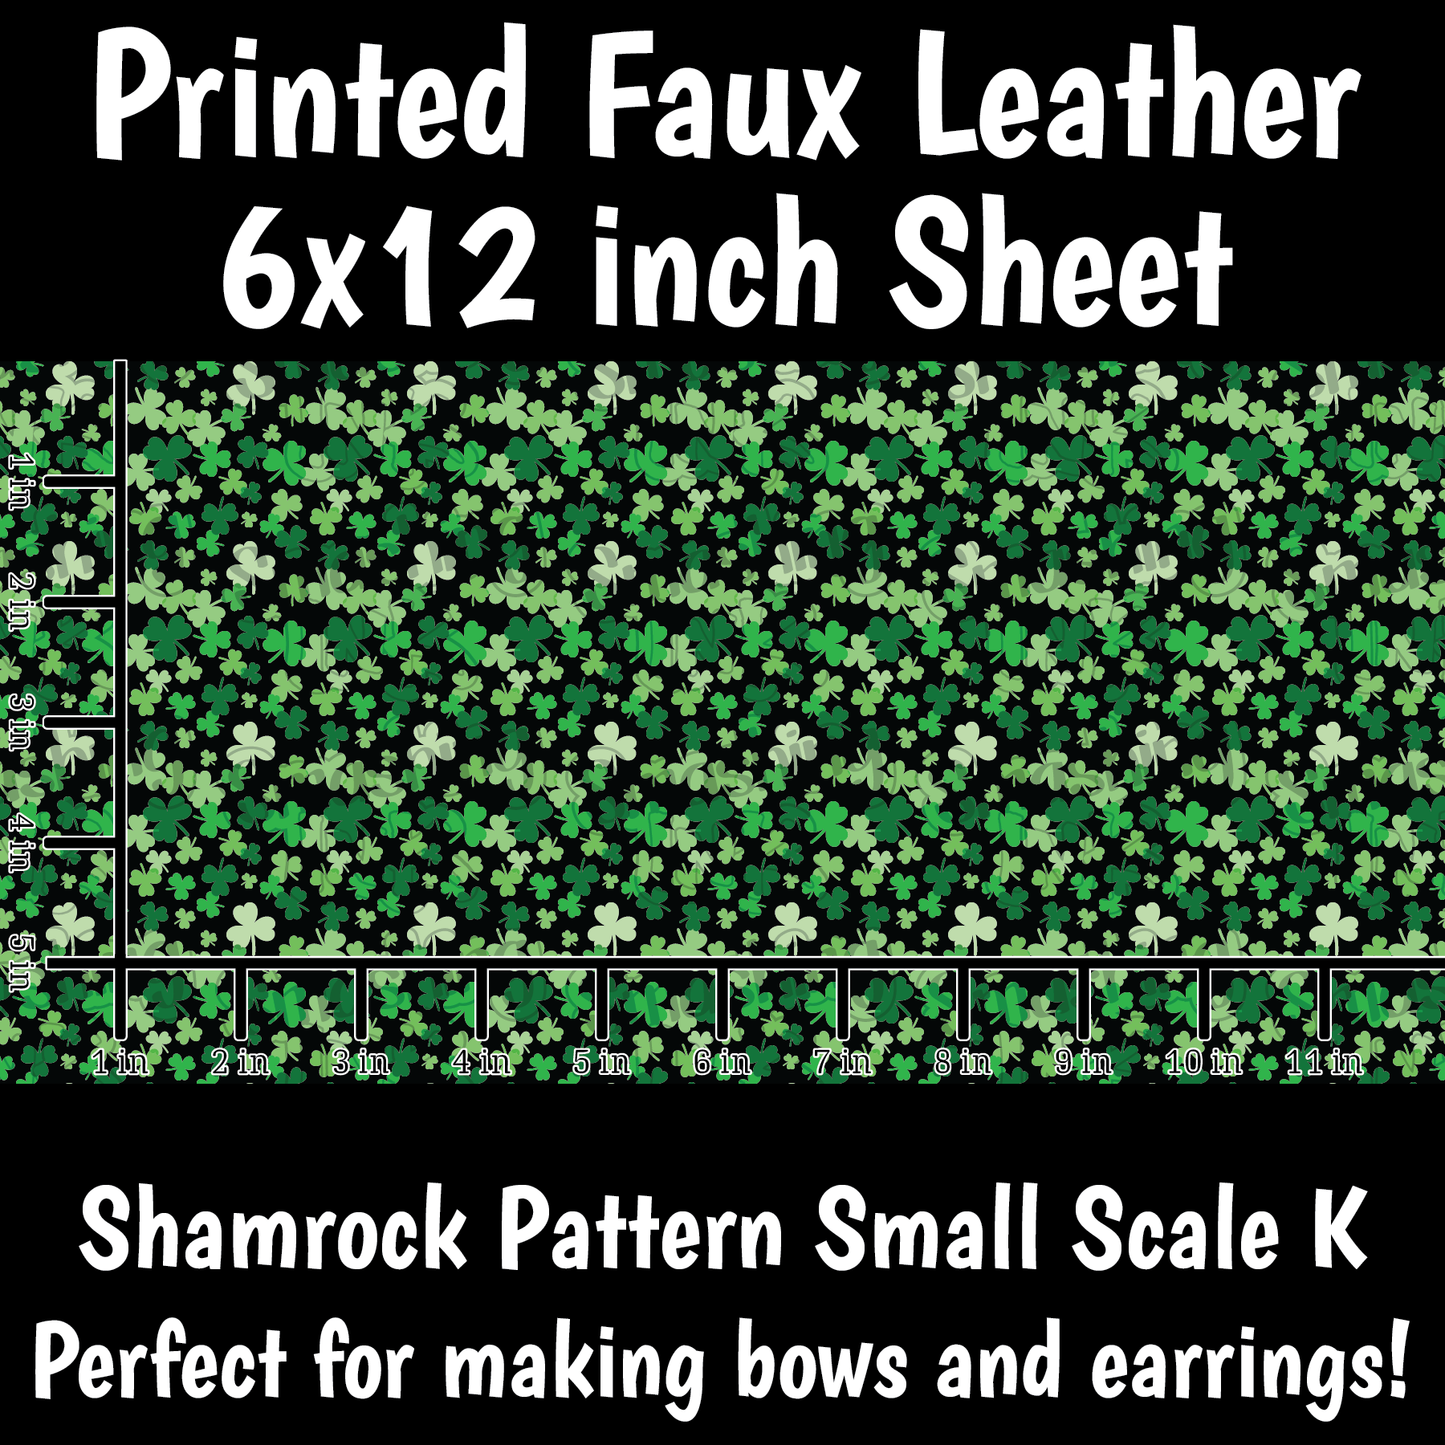 Shamrock Pattern Small Scale K - Faux Leather Sheet (SHIPS IN 3 BUS DAYS)